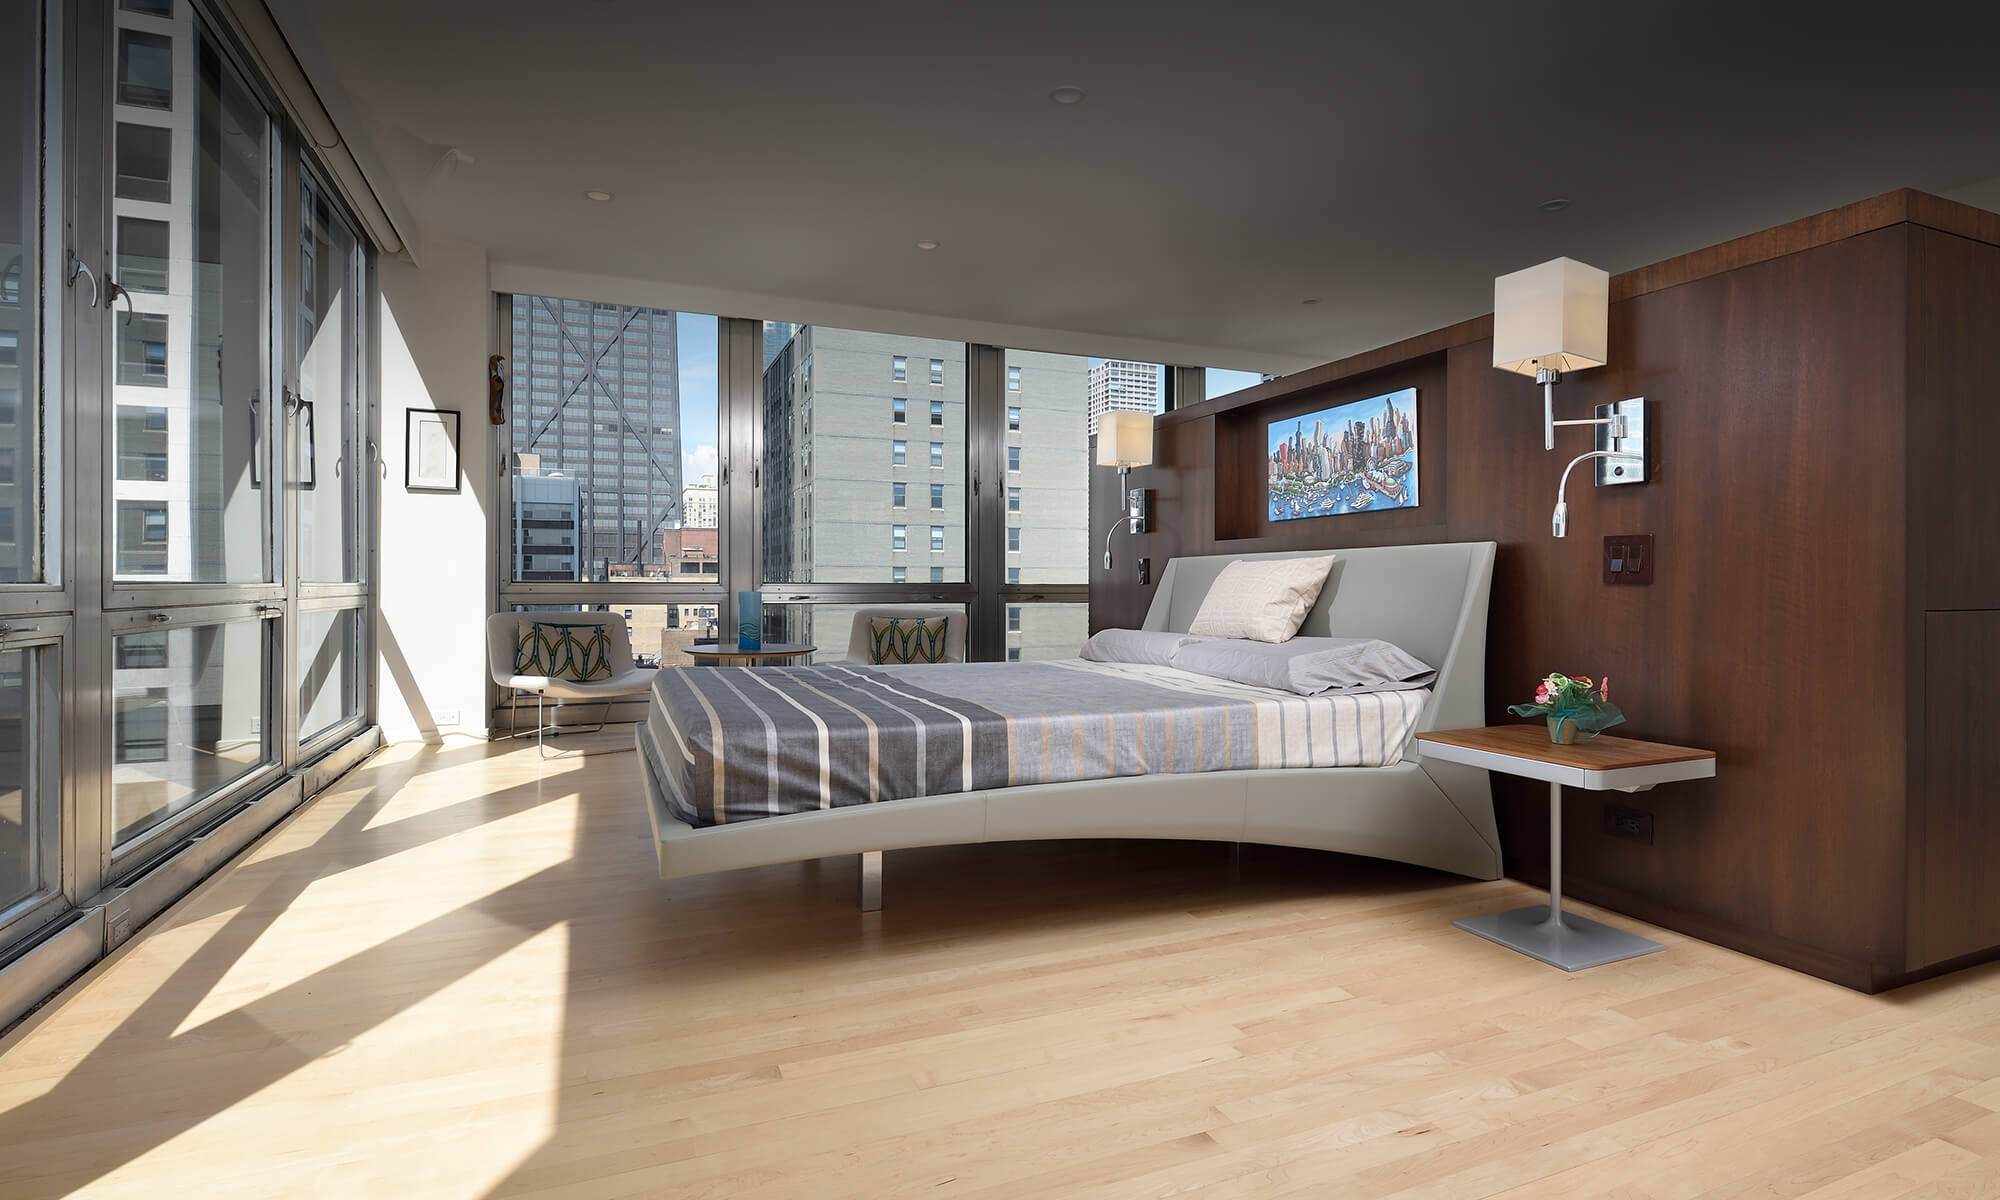 Artistic Construction downtown Chicago bedroom remodel with 360 view of skyline